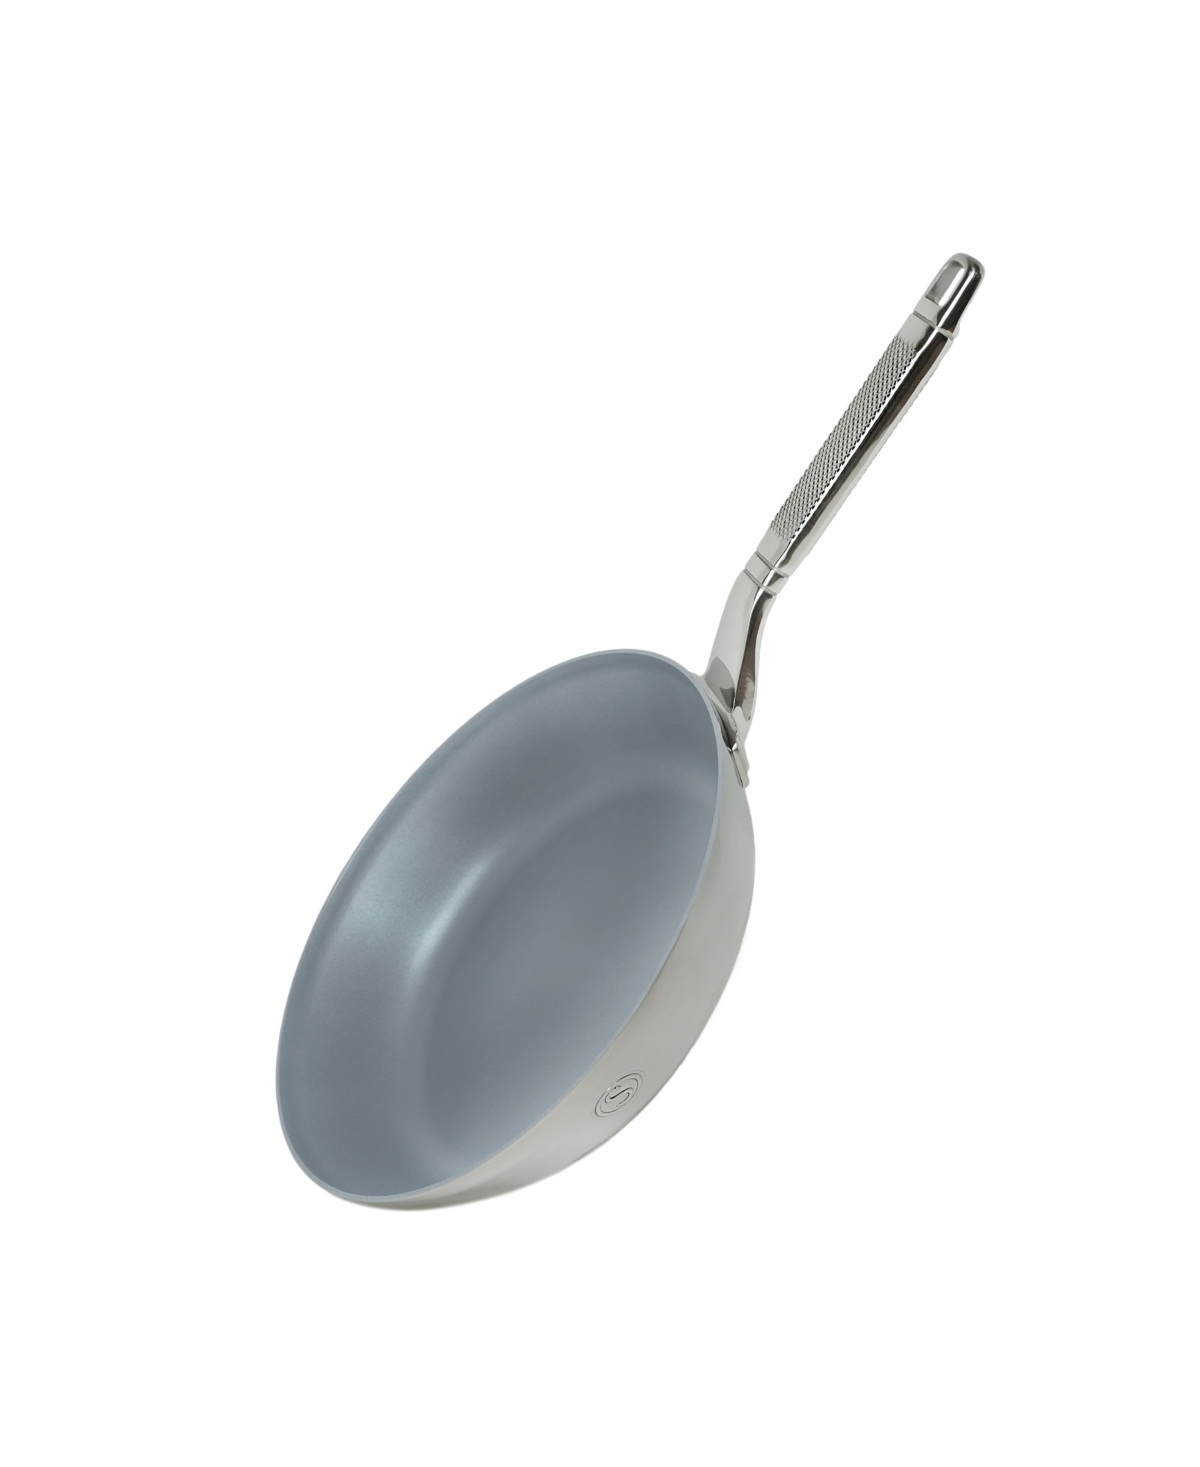 Shop Saveur Selects Tri-ply Stainless Steel 10" Non-stick Open Fry Pan